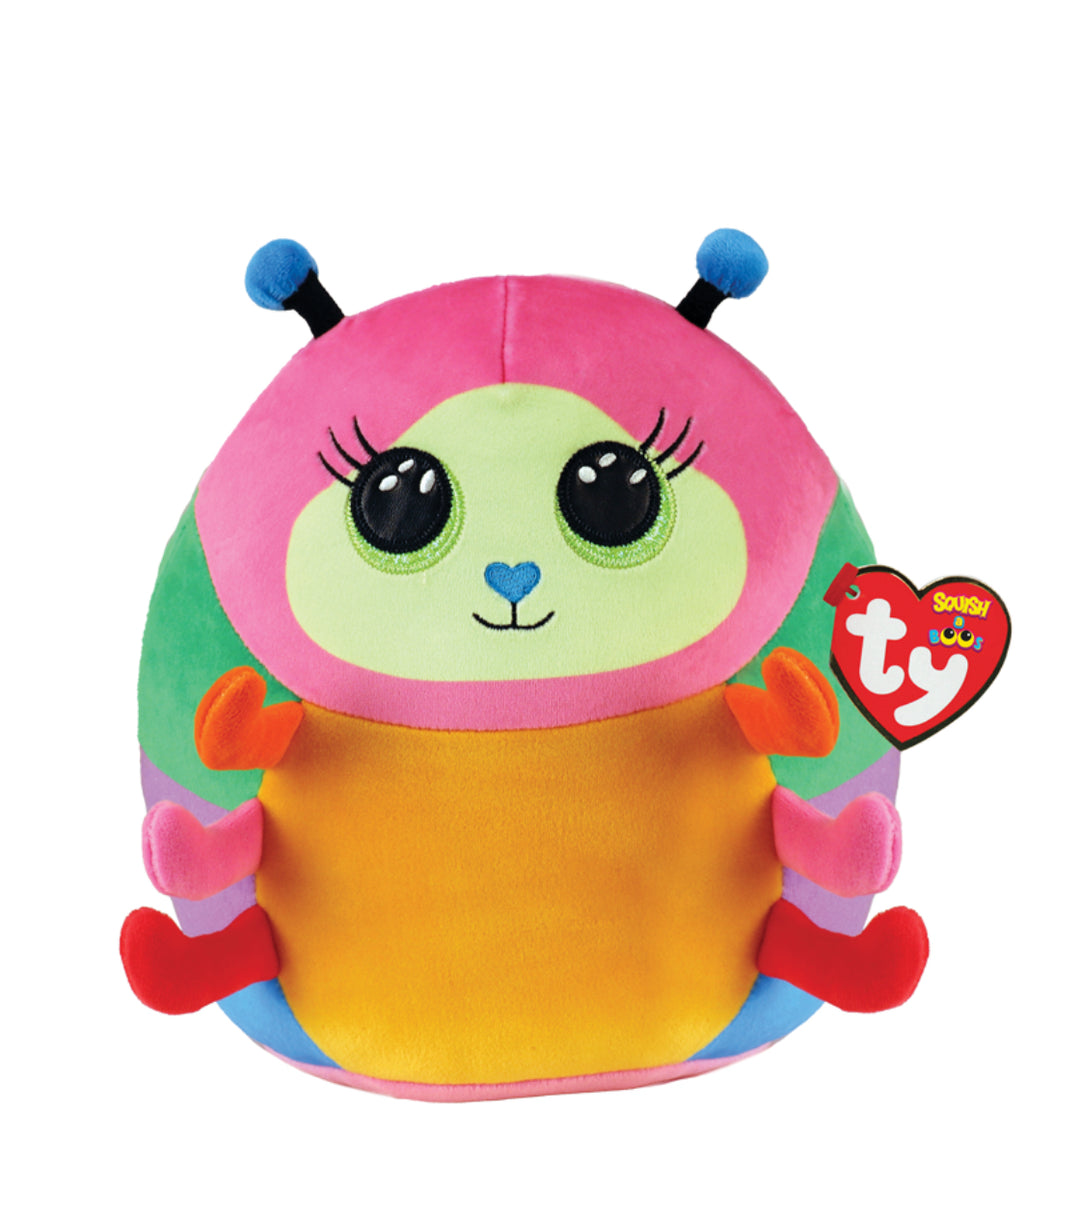 TY Large Squishy Beanies Stuffed Animal, Nessa-240 Kids-Inspired by Justeen-Women's Clothing Boutique in Chicago, Illinois